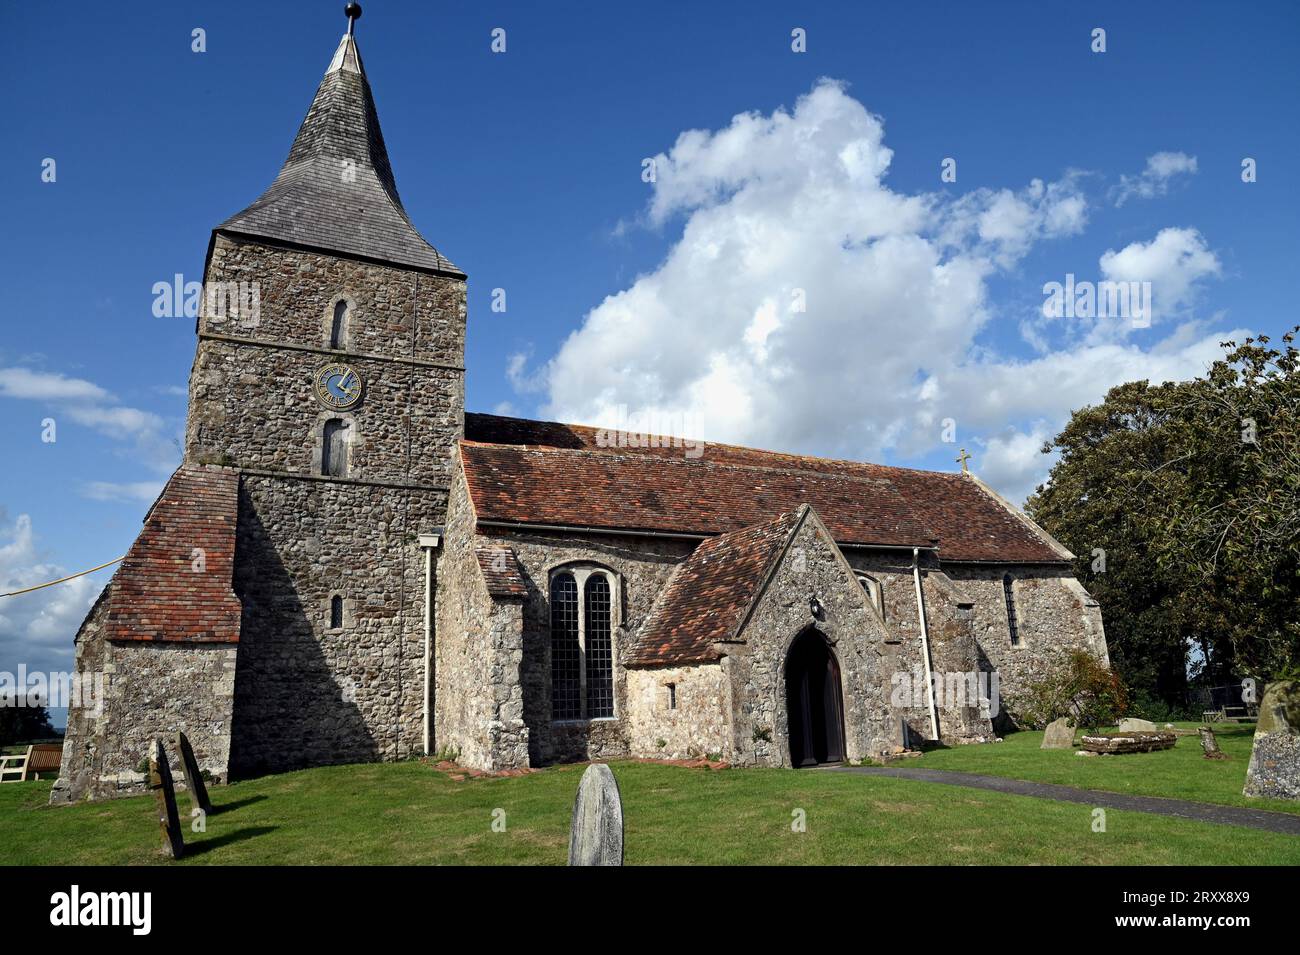 The church of St Mary the Virgin, St Mary in the Marsh, Romney Marsh, Kent. E Nisbet, the children's author, is buried and commemorated there. Stock Photo